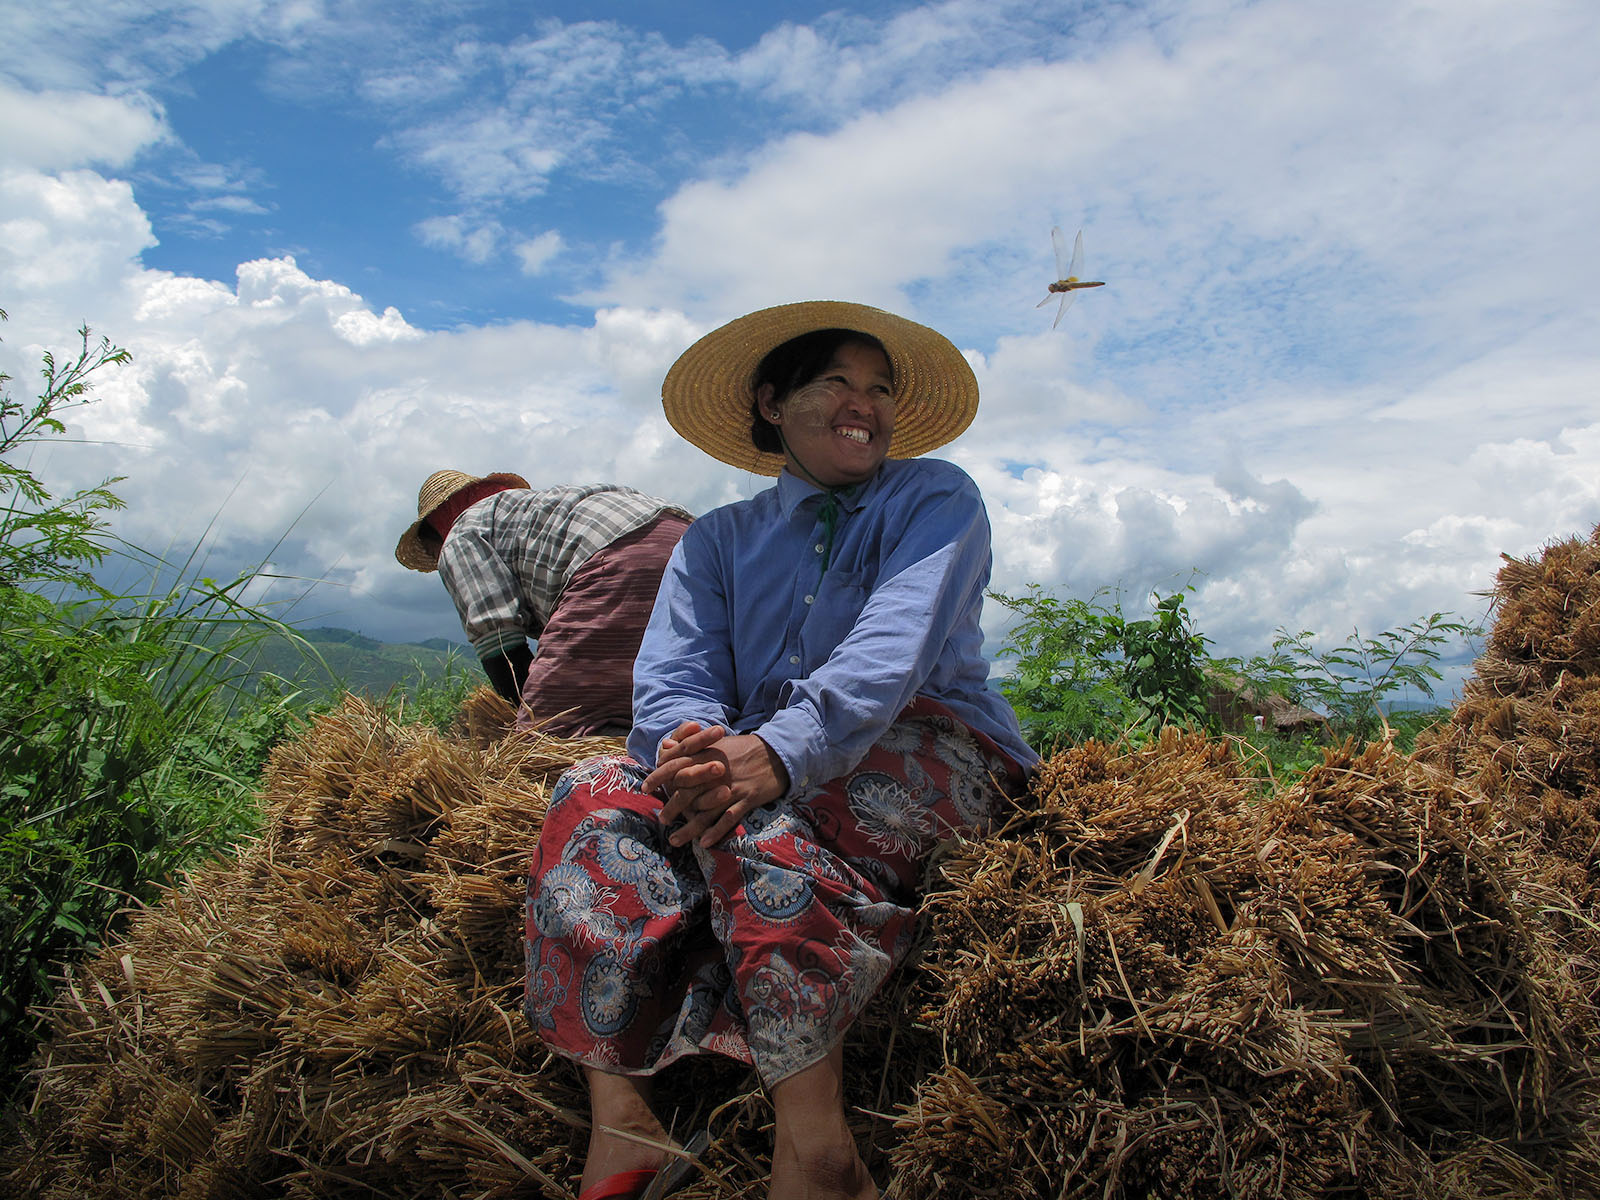 In the foreground, a smiling woman is sitting on a pile of straw, wearing a brim hat. The sky is cloudy. A dragonfly is flying. Behind a man is facing away from the image. He is picking something from the field.